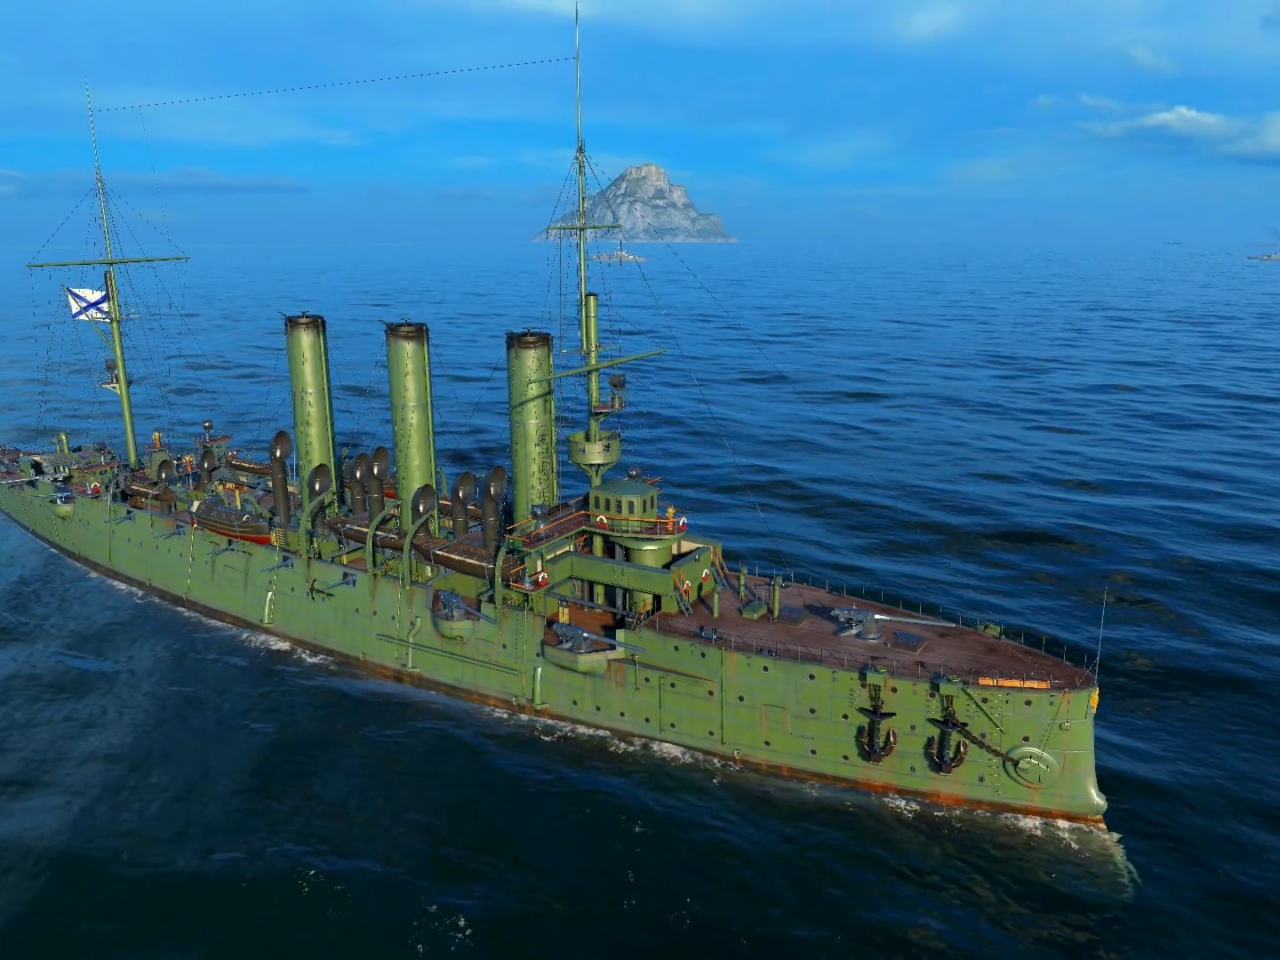 world of warships diana review